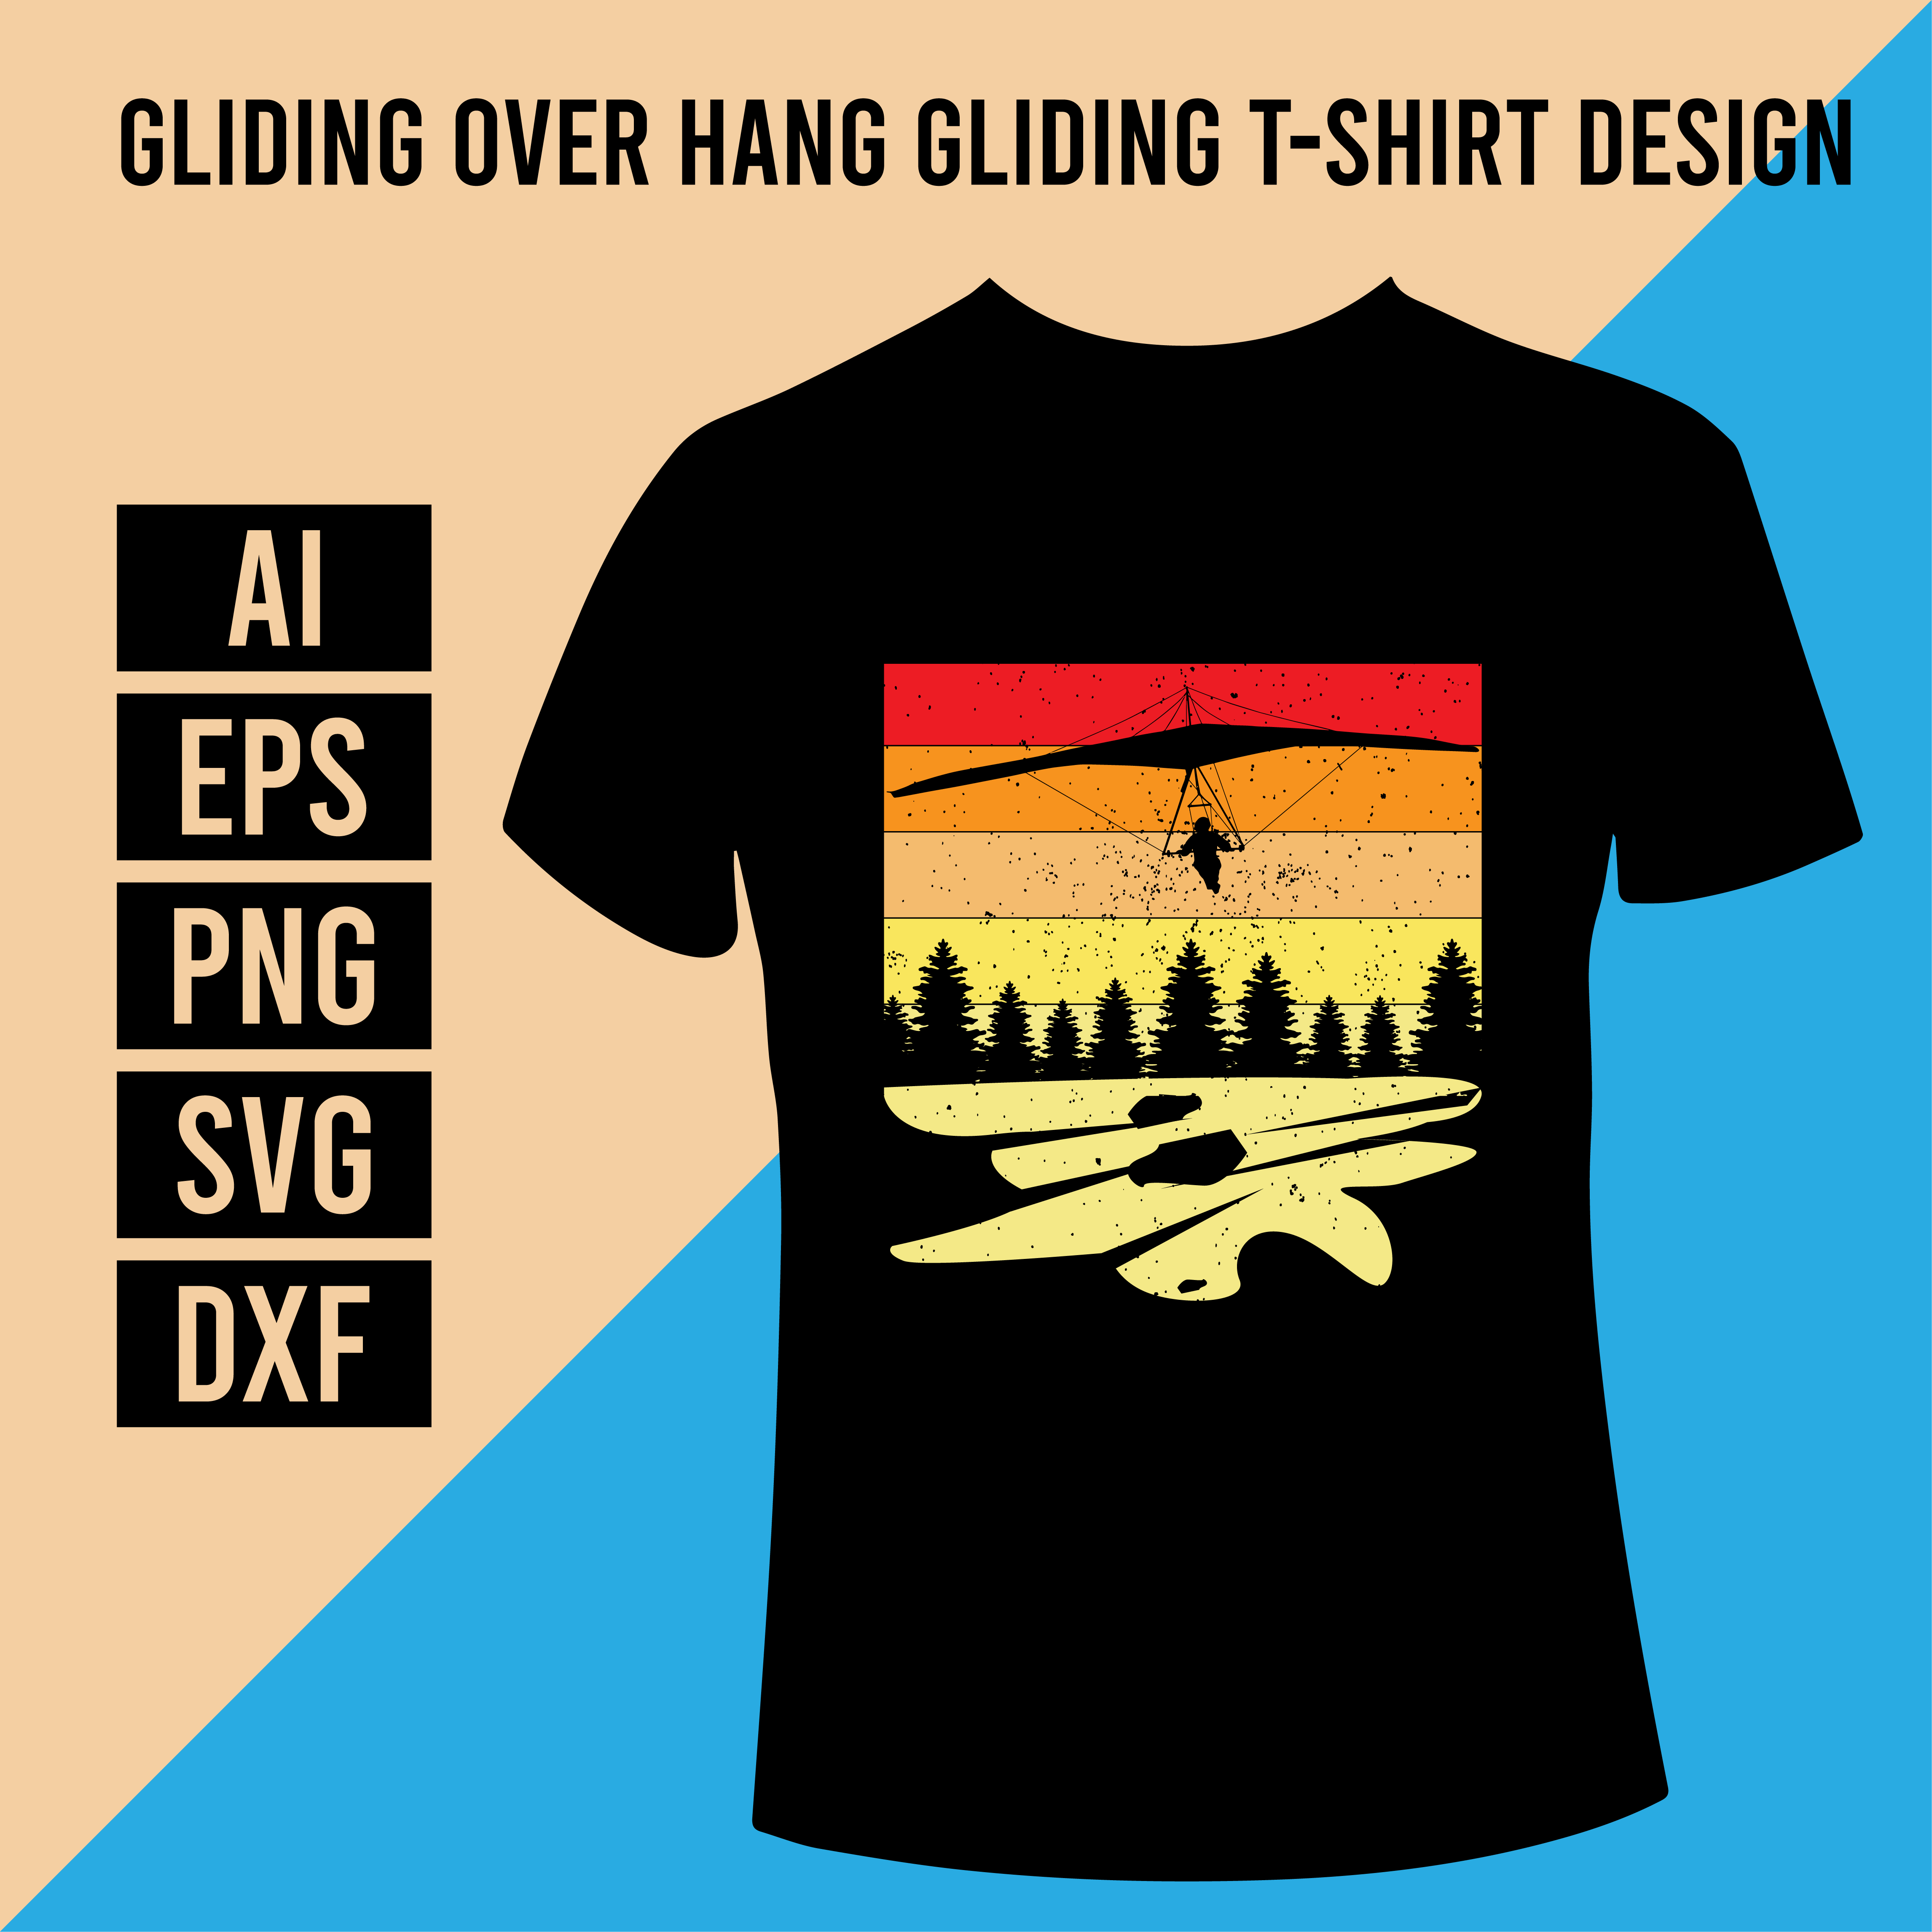 Gliding Over Hang Gliding T-Shirt Design cover image.